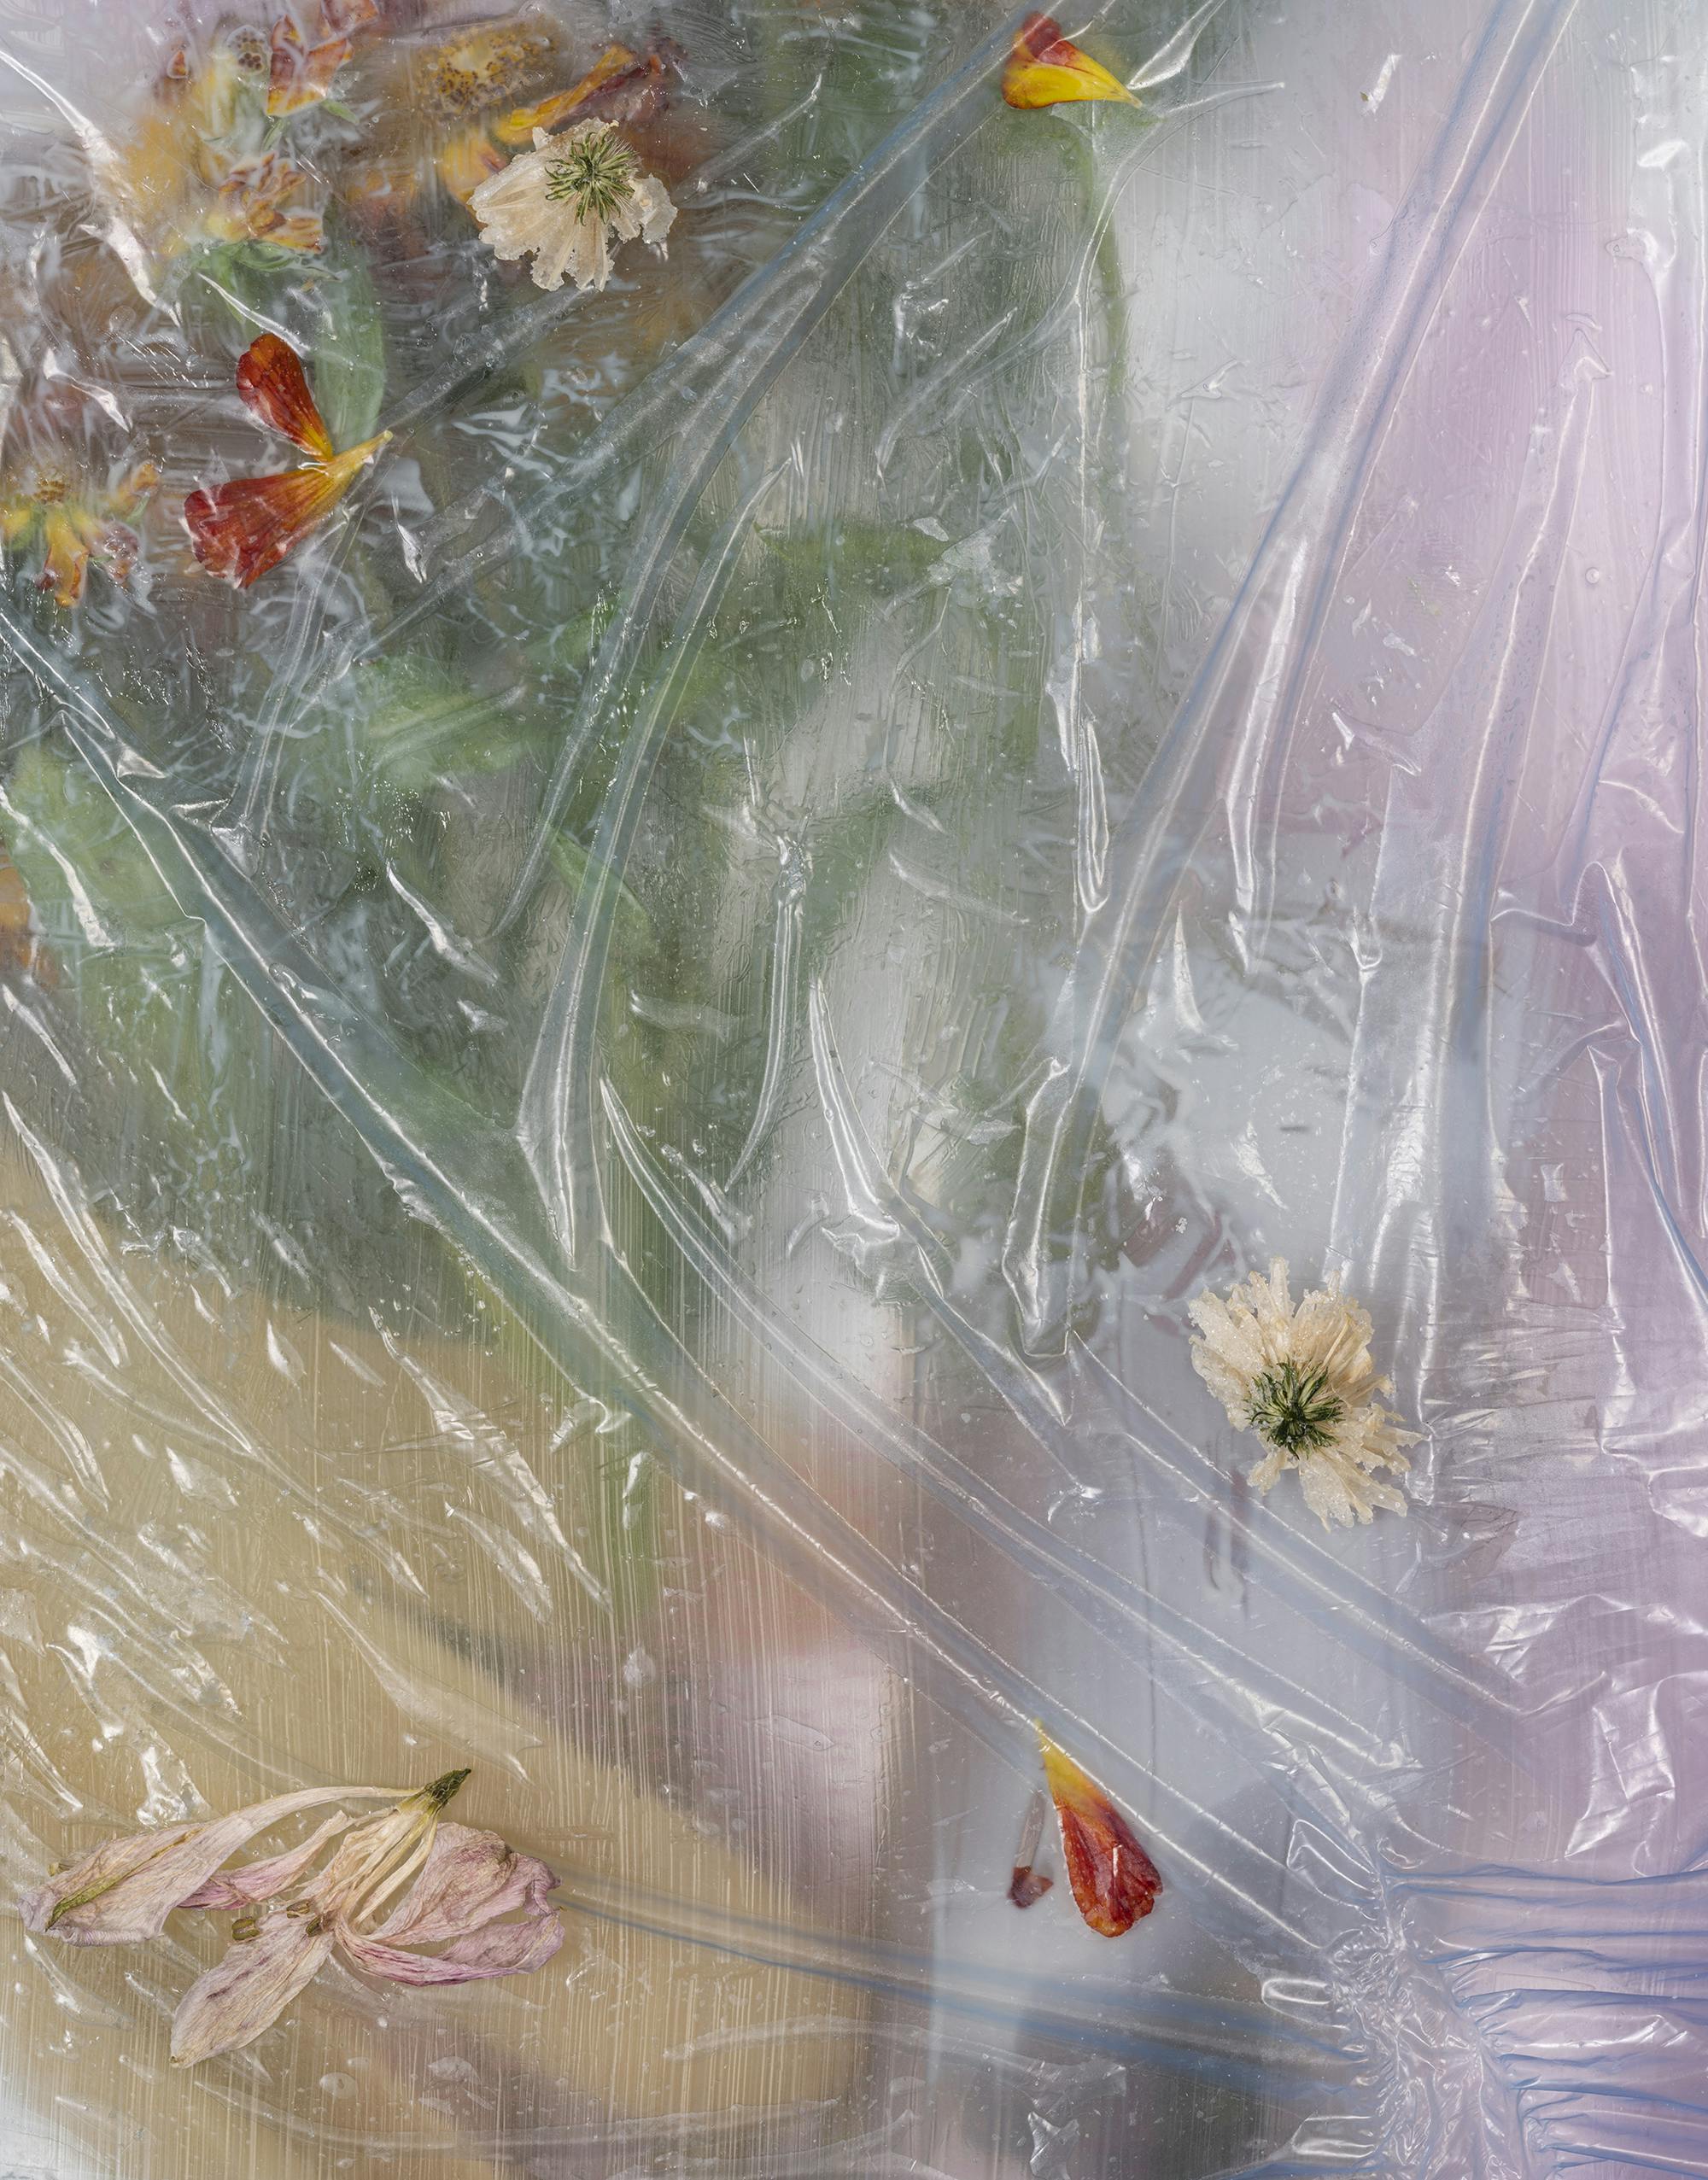 A photographic work by Michelle Bui. Diffuse colours and indecipherable plant matter appear beneath a layer of wrinkled plastic film. Sparse flowers and petals are sprinkled across the picture plane.